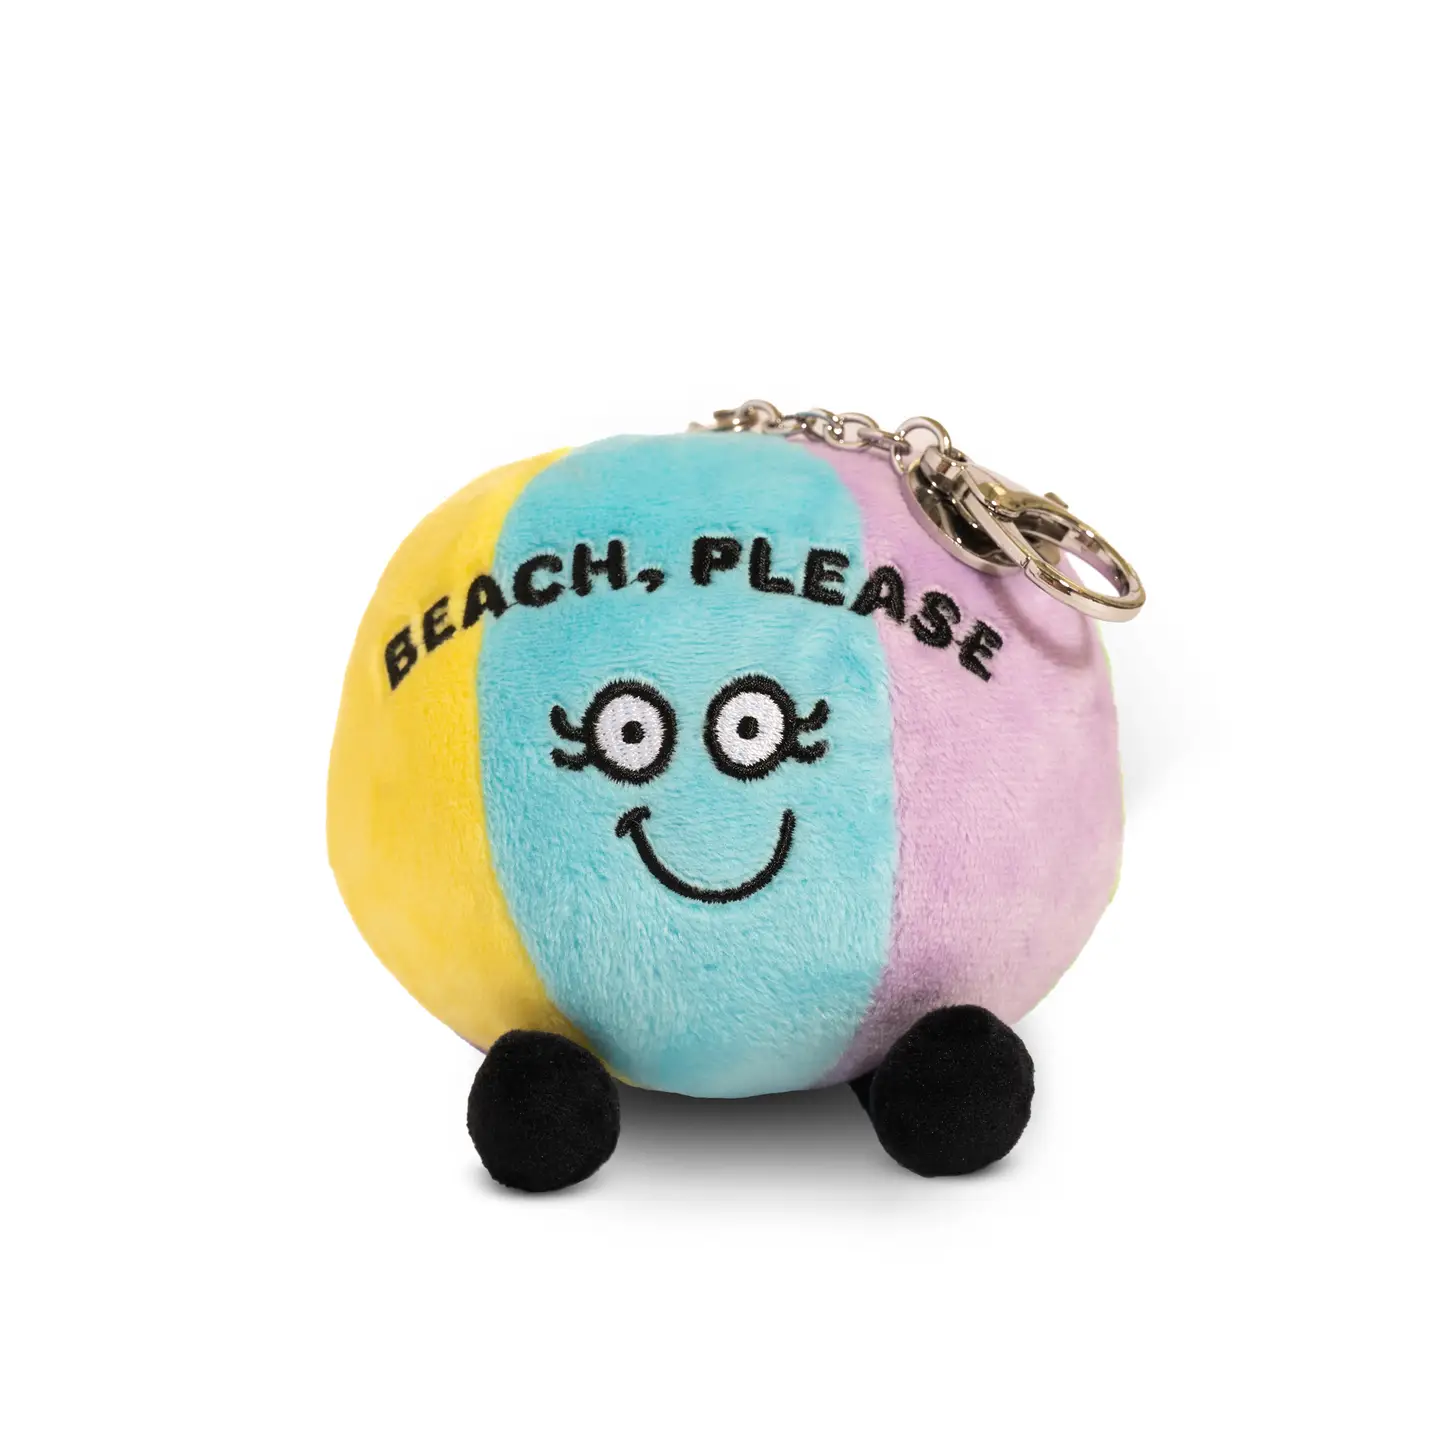 Beach, please! This bag charm is so cute, she’s shore to make a splash! Her flirty eyes, sweet smile, and dangly legs make her impossi-ball to miss. She’s the perfect accent accessory for any purse, bag, or backpack.